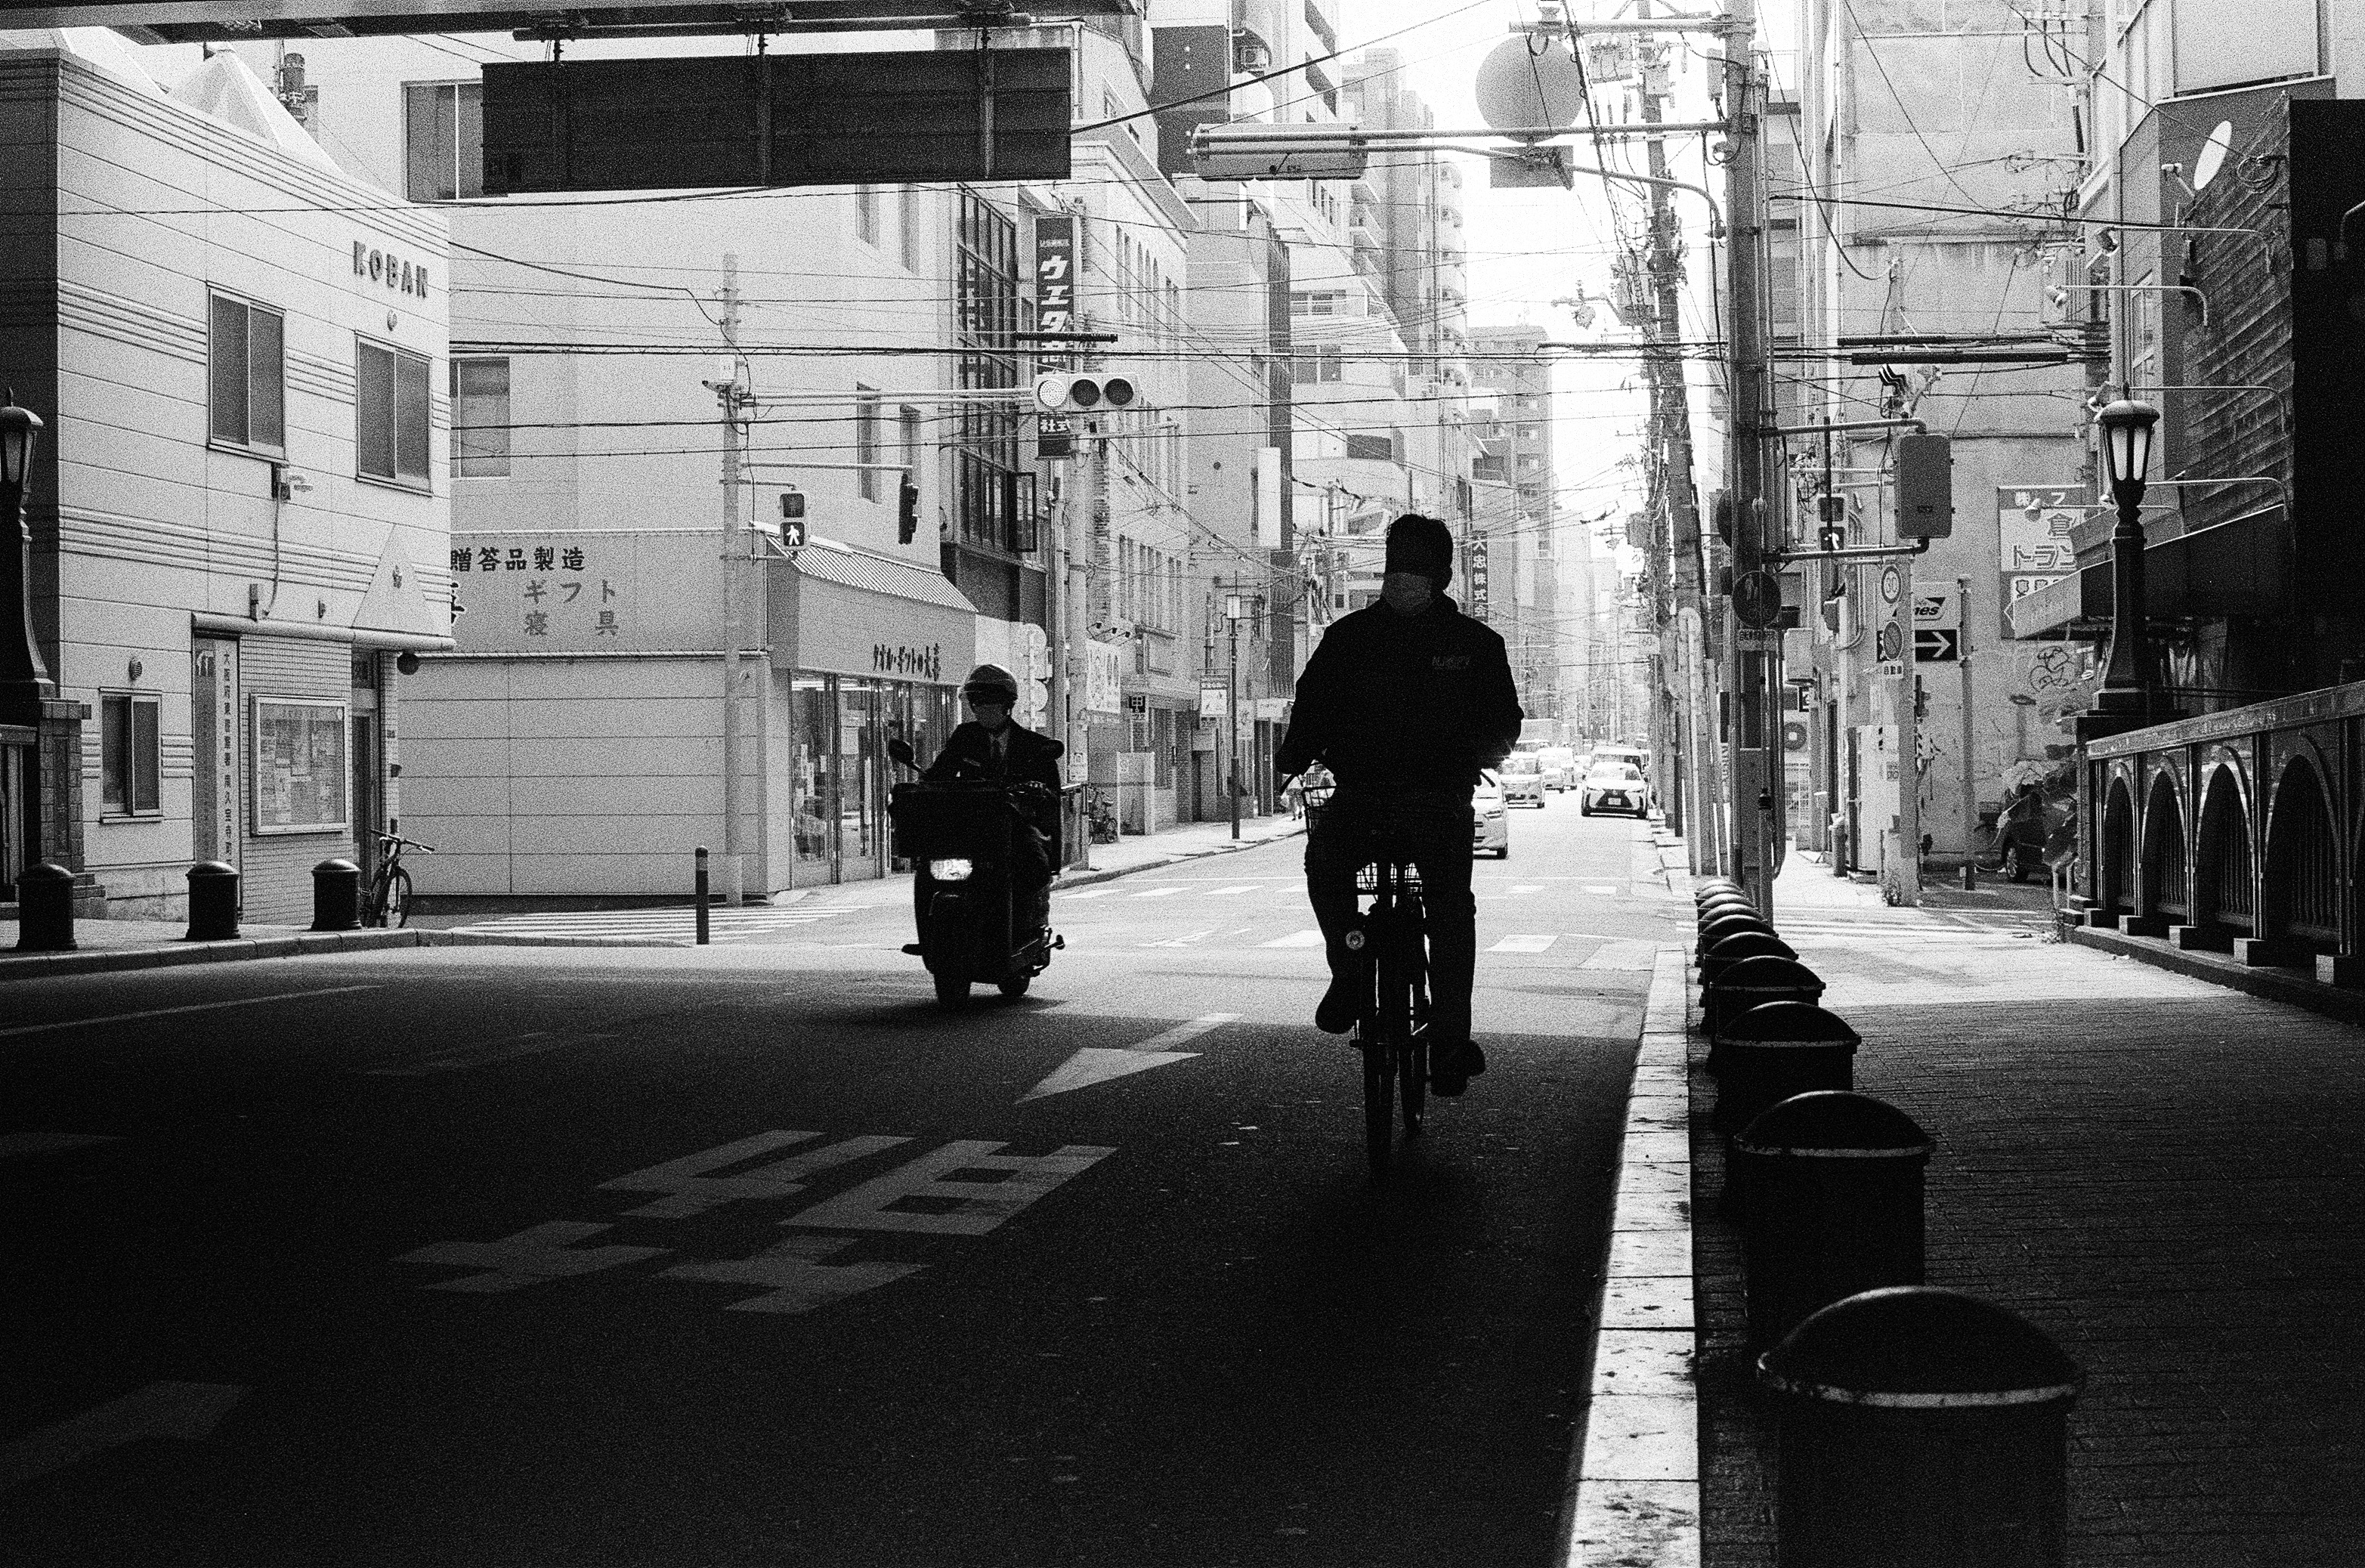 Osaka - Cycling is a common mode of urban transportation